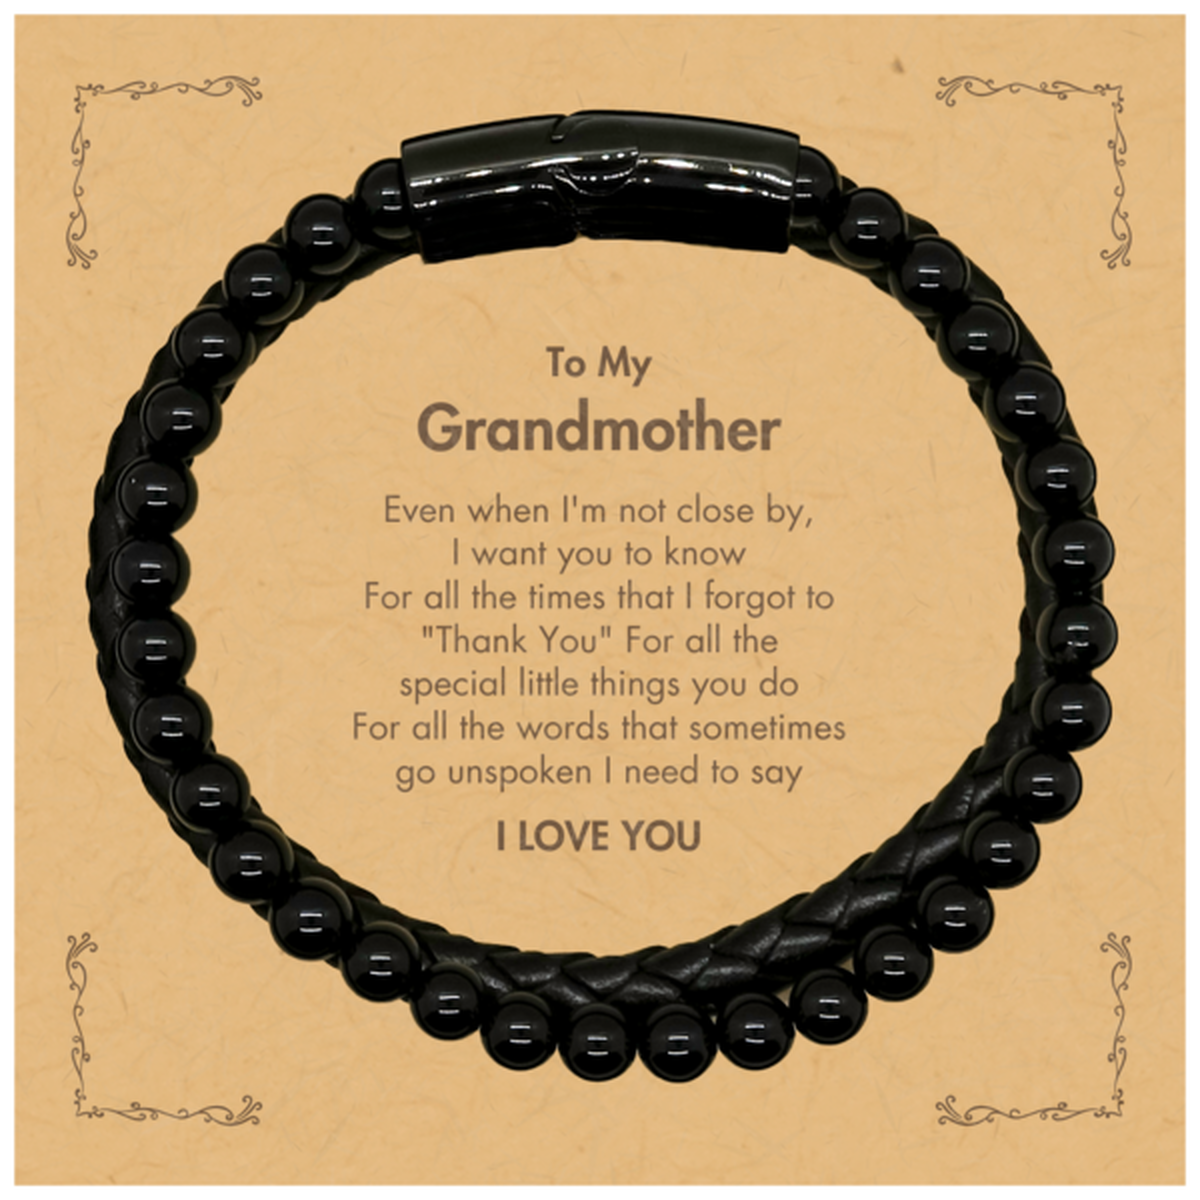 Thank You Gifts for Grandmother, Keepsake Stone Leather Bracelets Gifts for Grandmother Birthday Mother's day Father's Day Grandmother For all the words That sometimes go unspoken I need to say I LOVE YOU